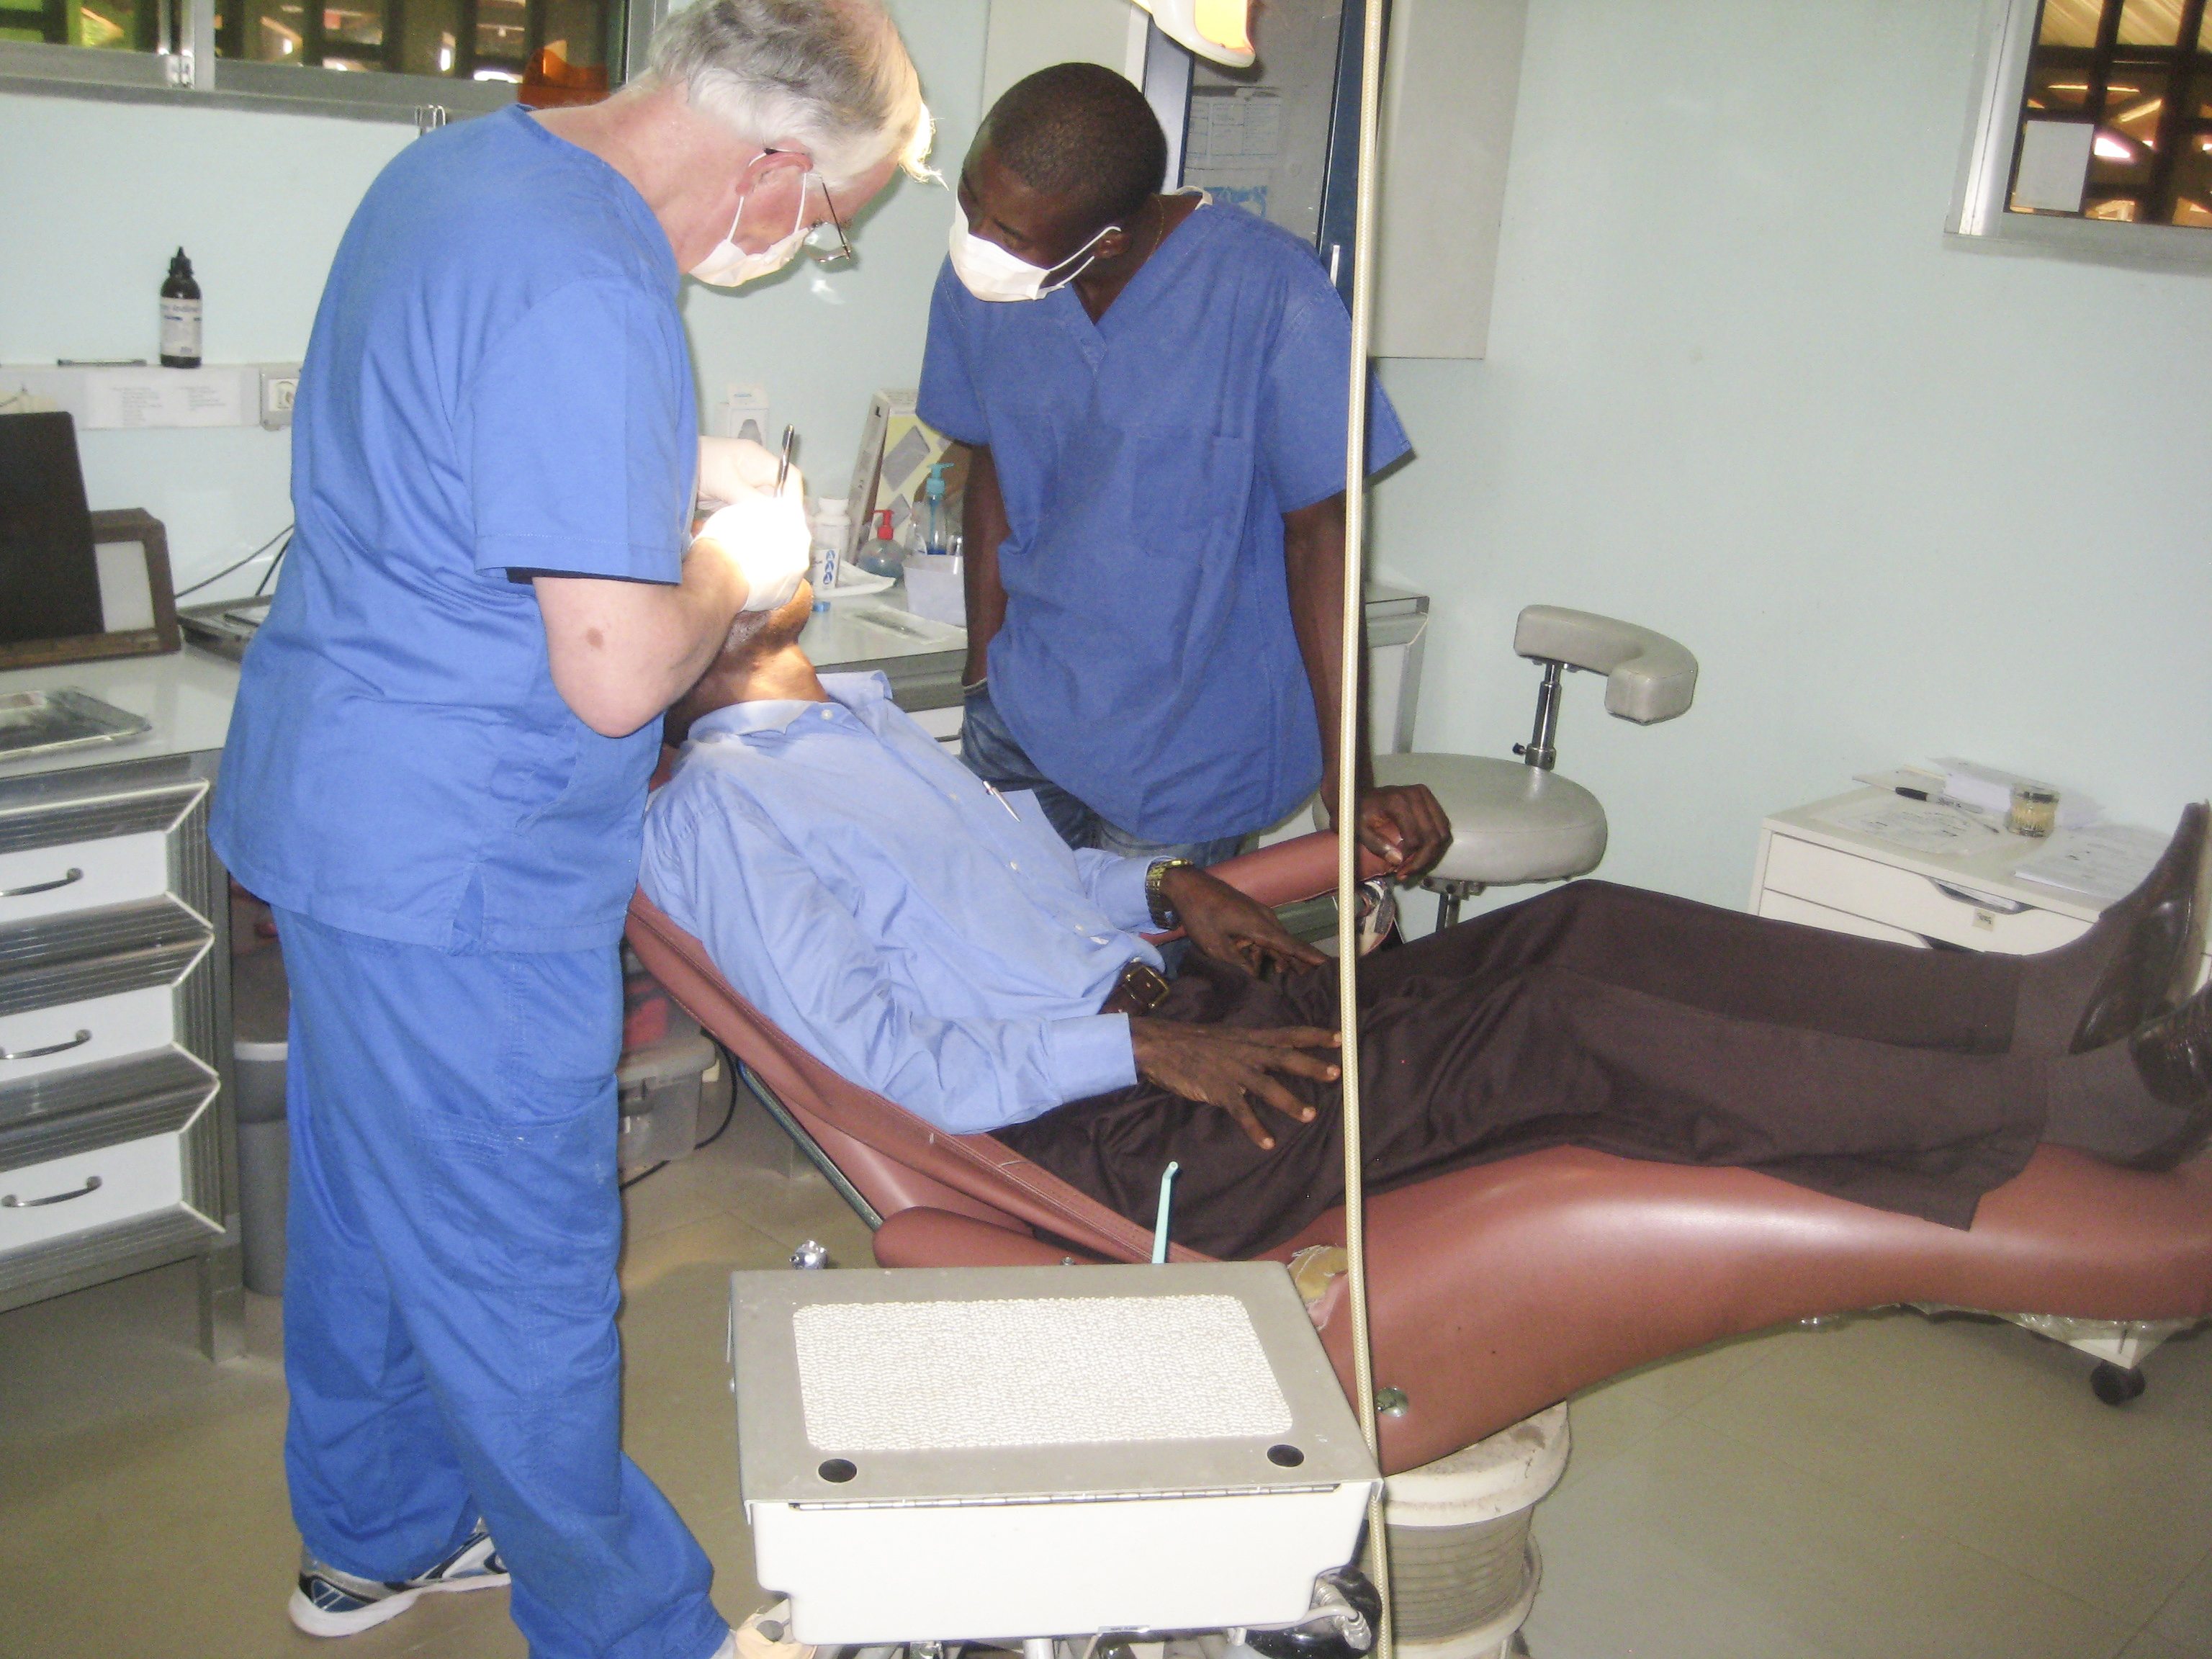 PROVIDING A NEED – Dr. Bill Hill works on a patient with the aid of his dental assistant